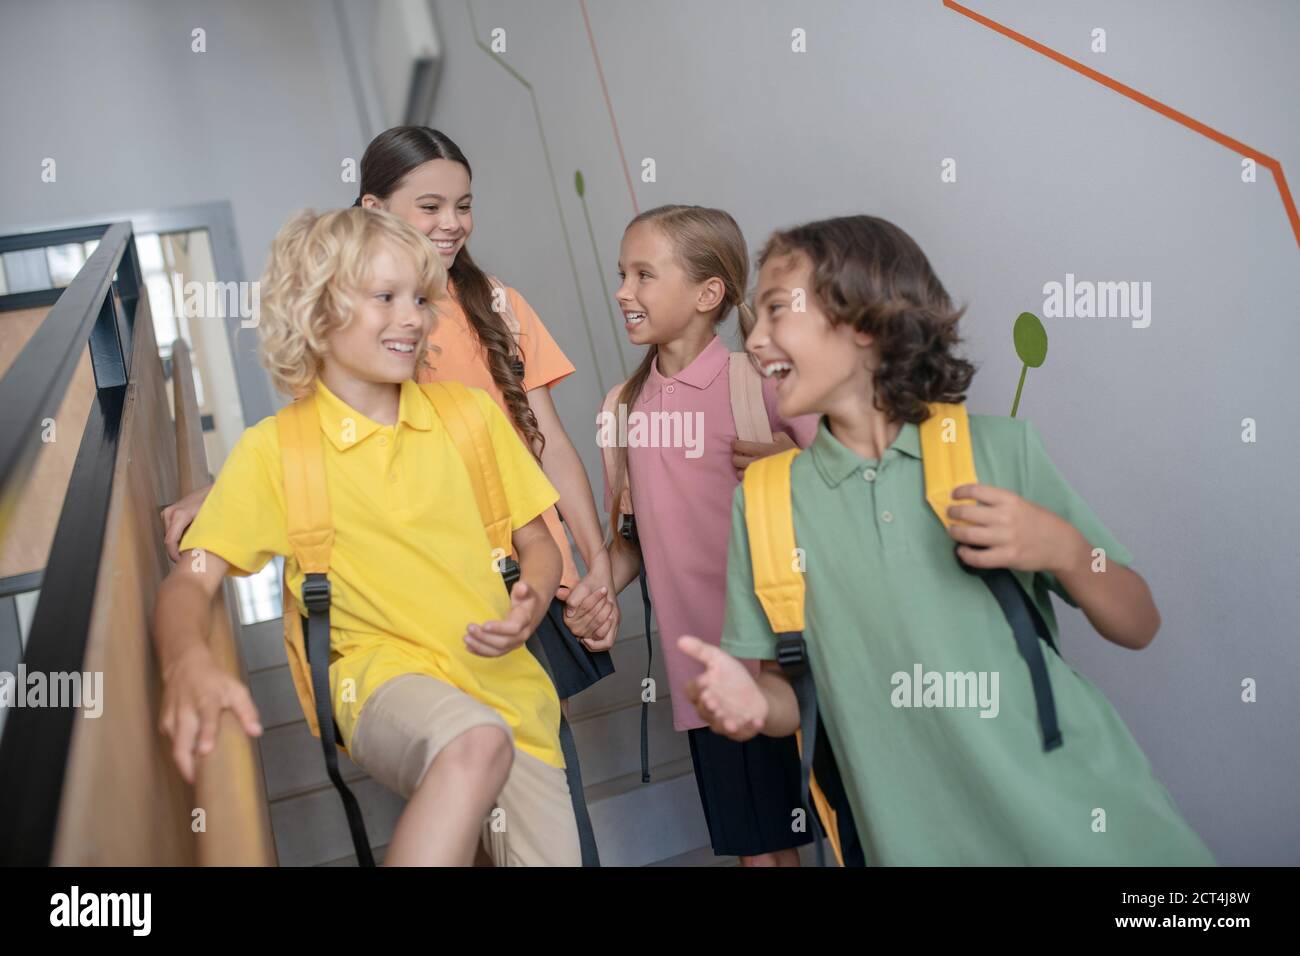 Boys and girls going downstairs and looking excited Stock Photo